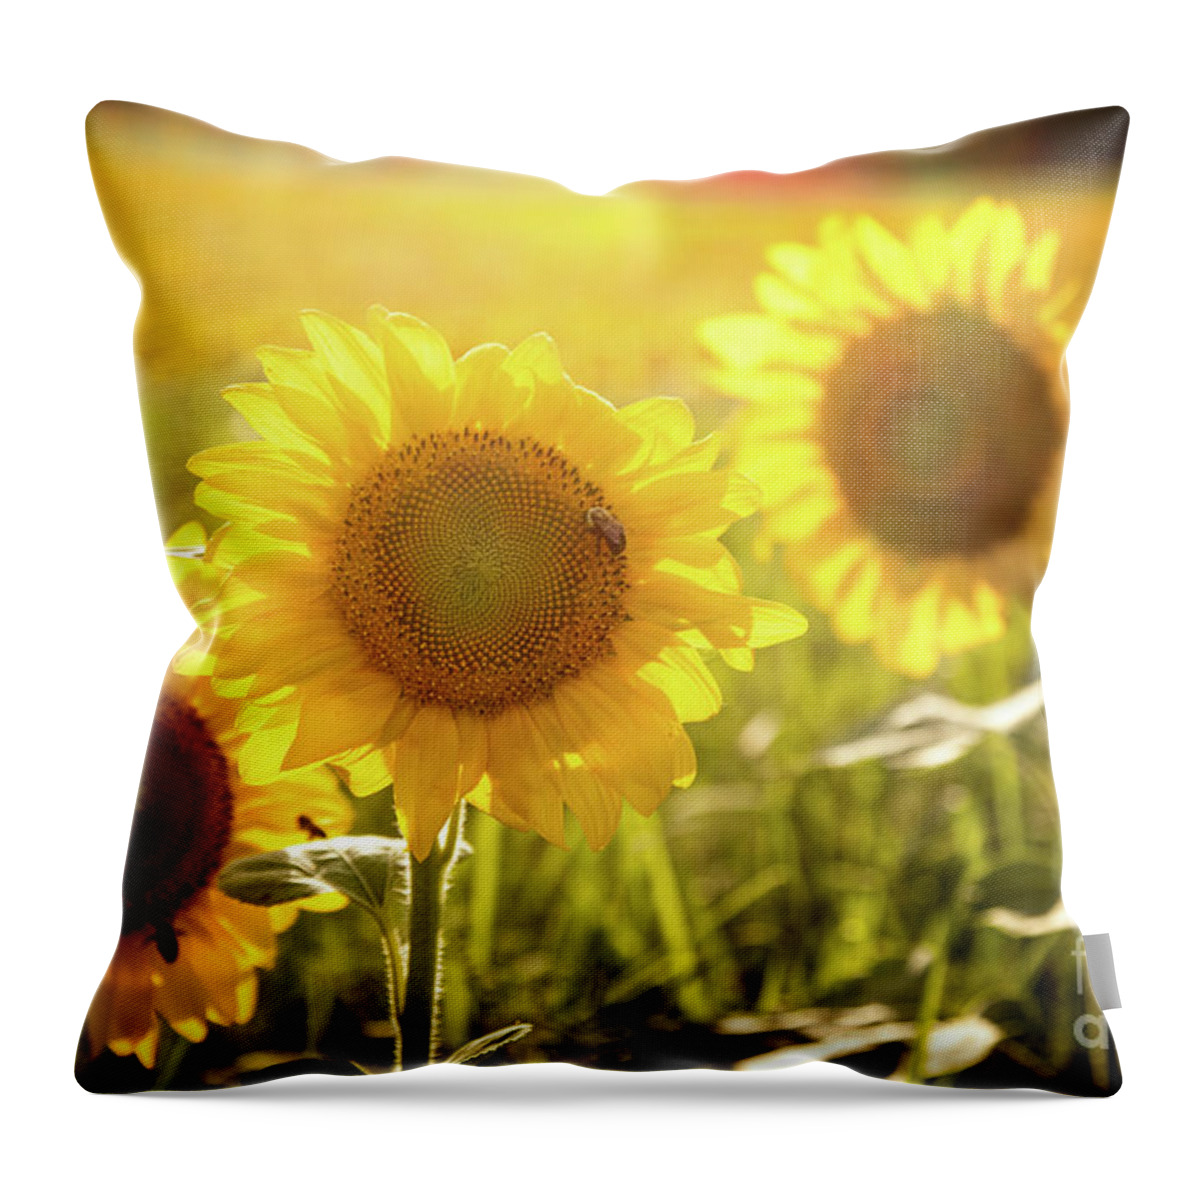 Sunflowers Throw Pillow featuring the photograph Bright Sunflower Trio by Eleanor Abramson